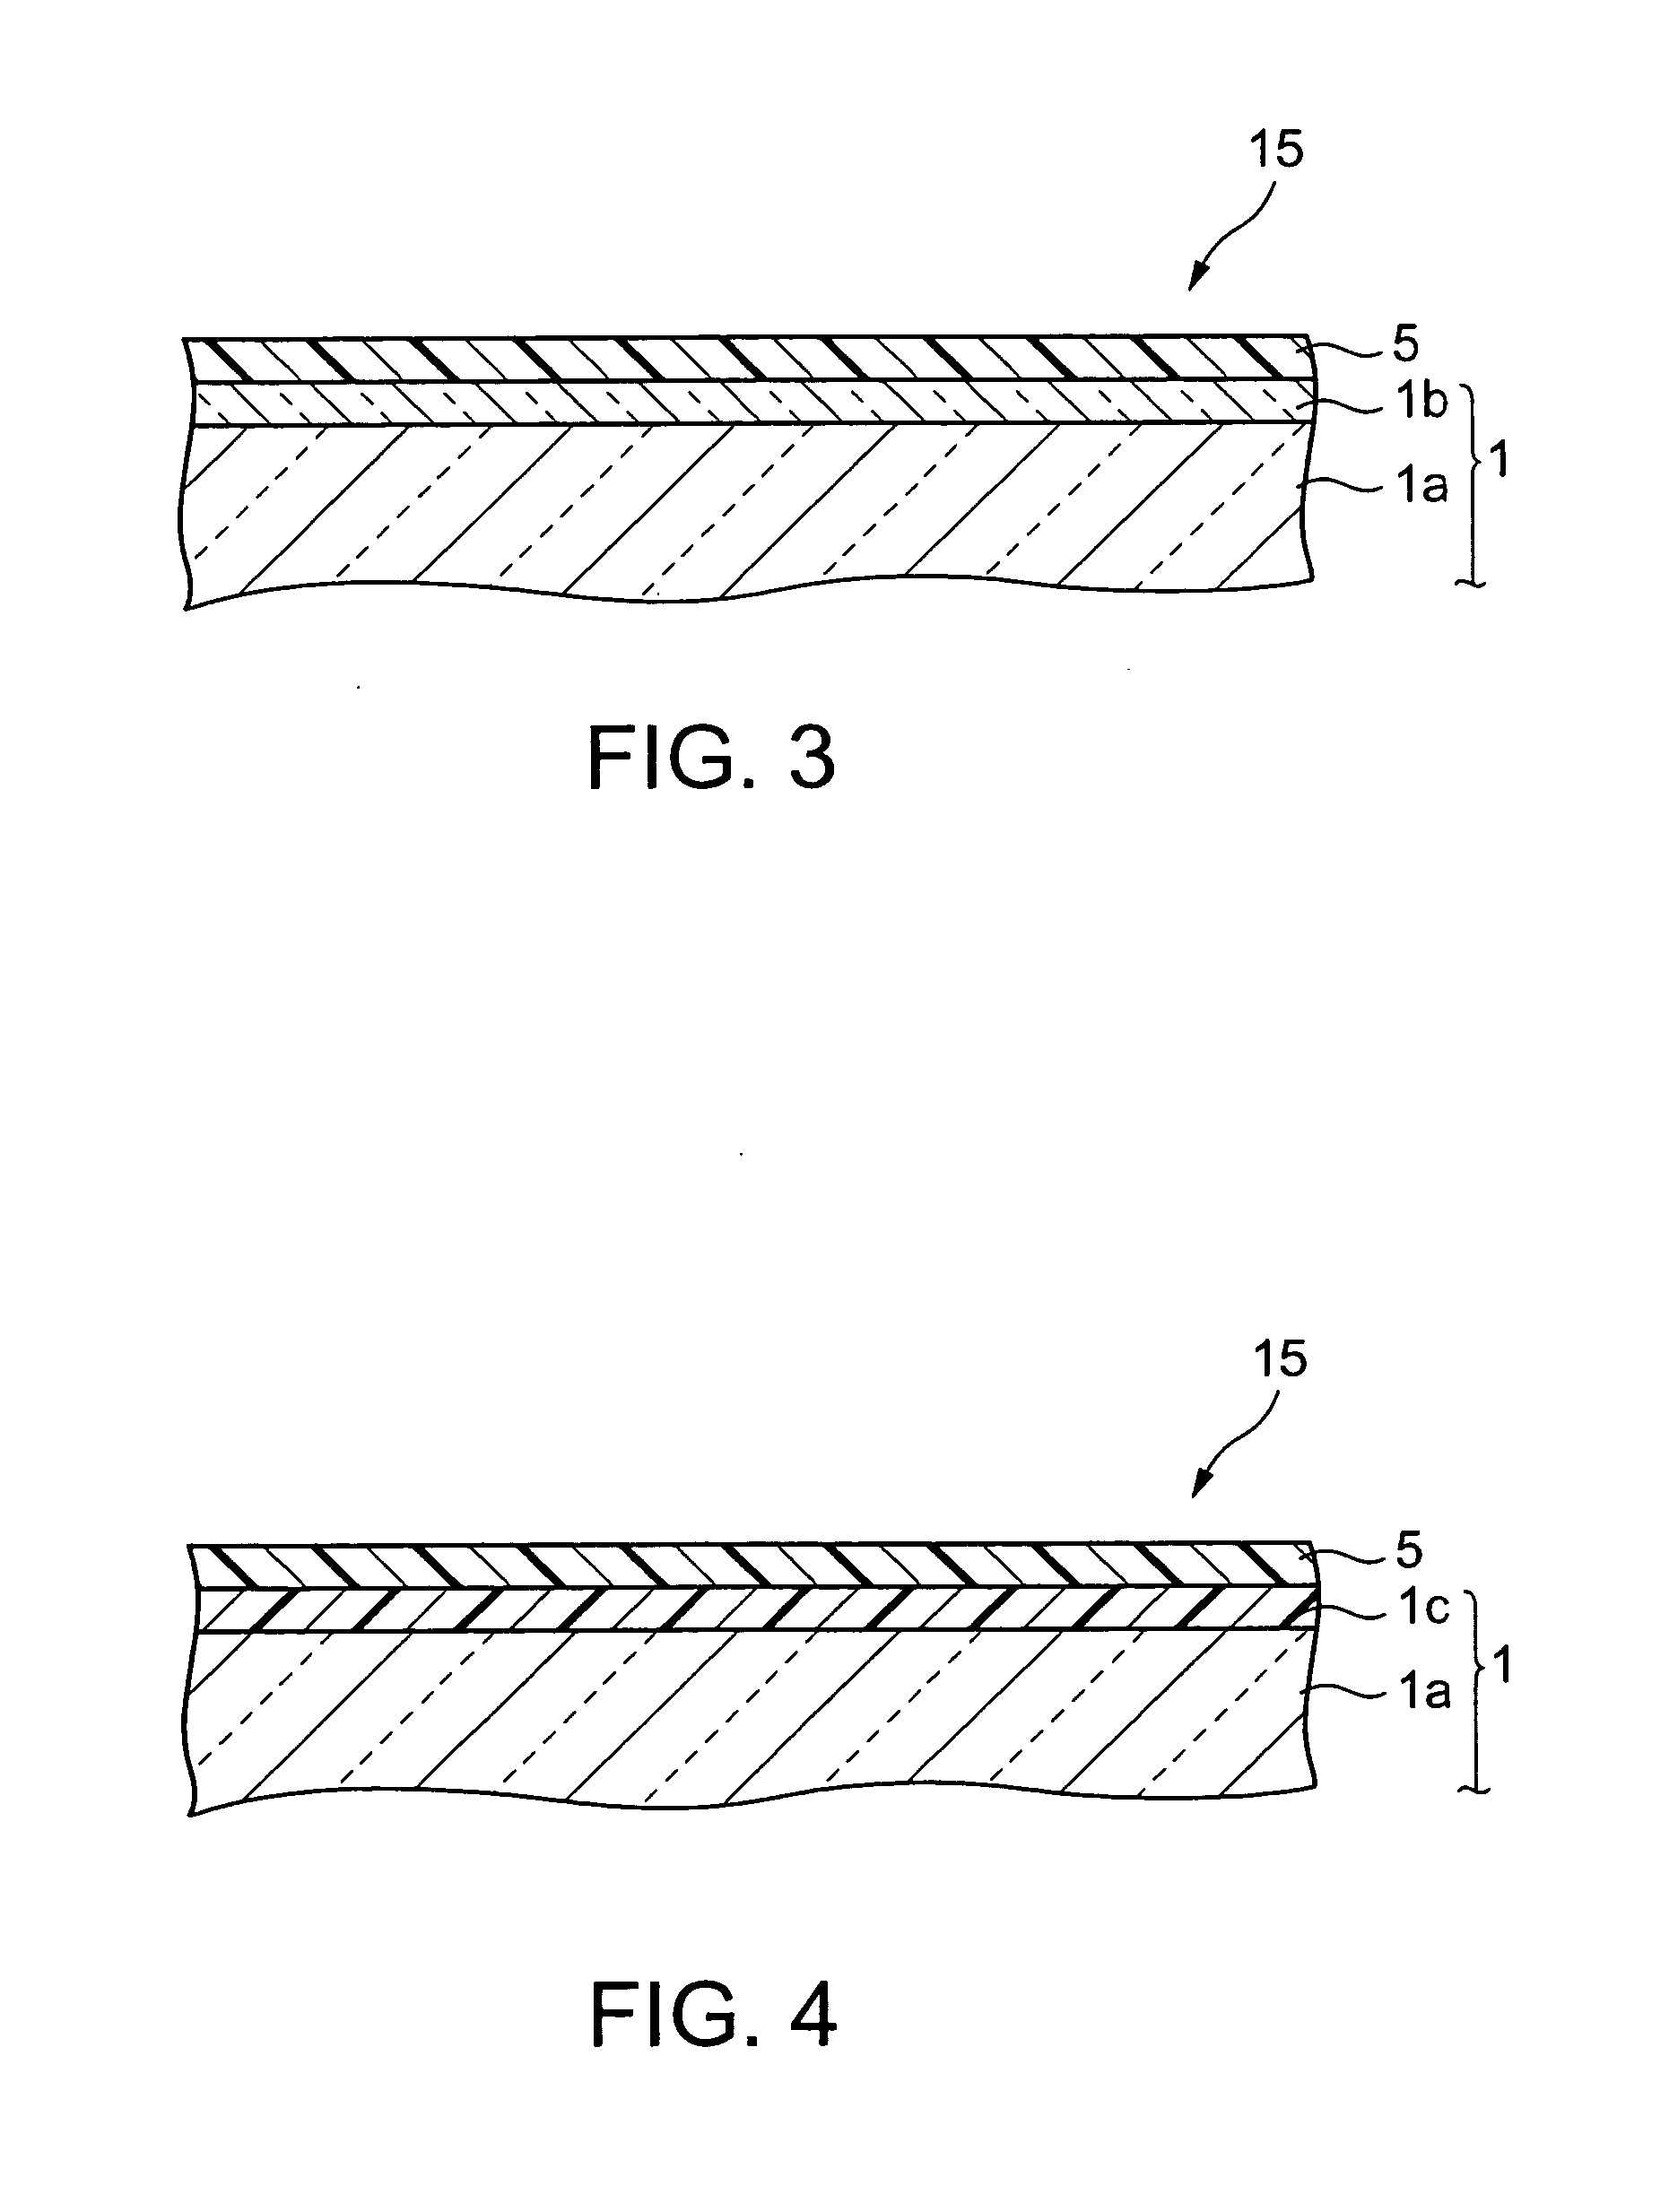 Optical element, process for producing the same, substrate for liquid crystal alignment, liquid crystal display device, and birefringent material